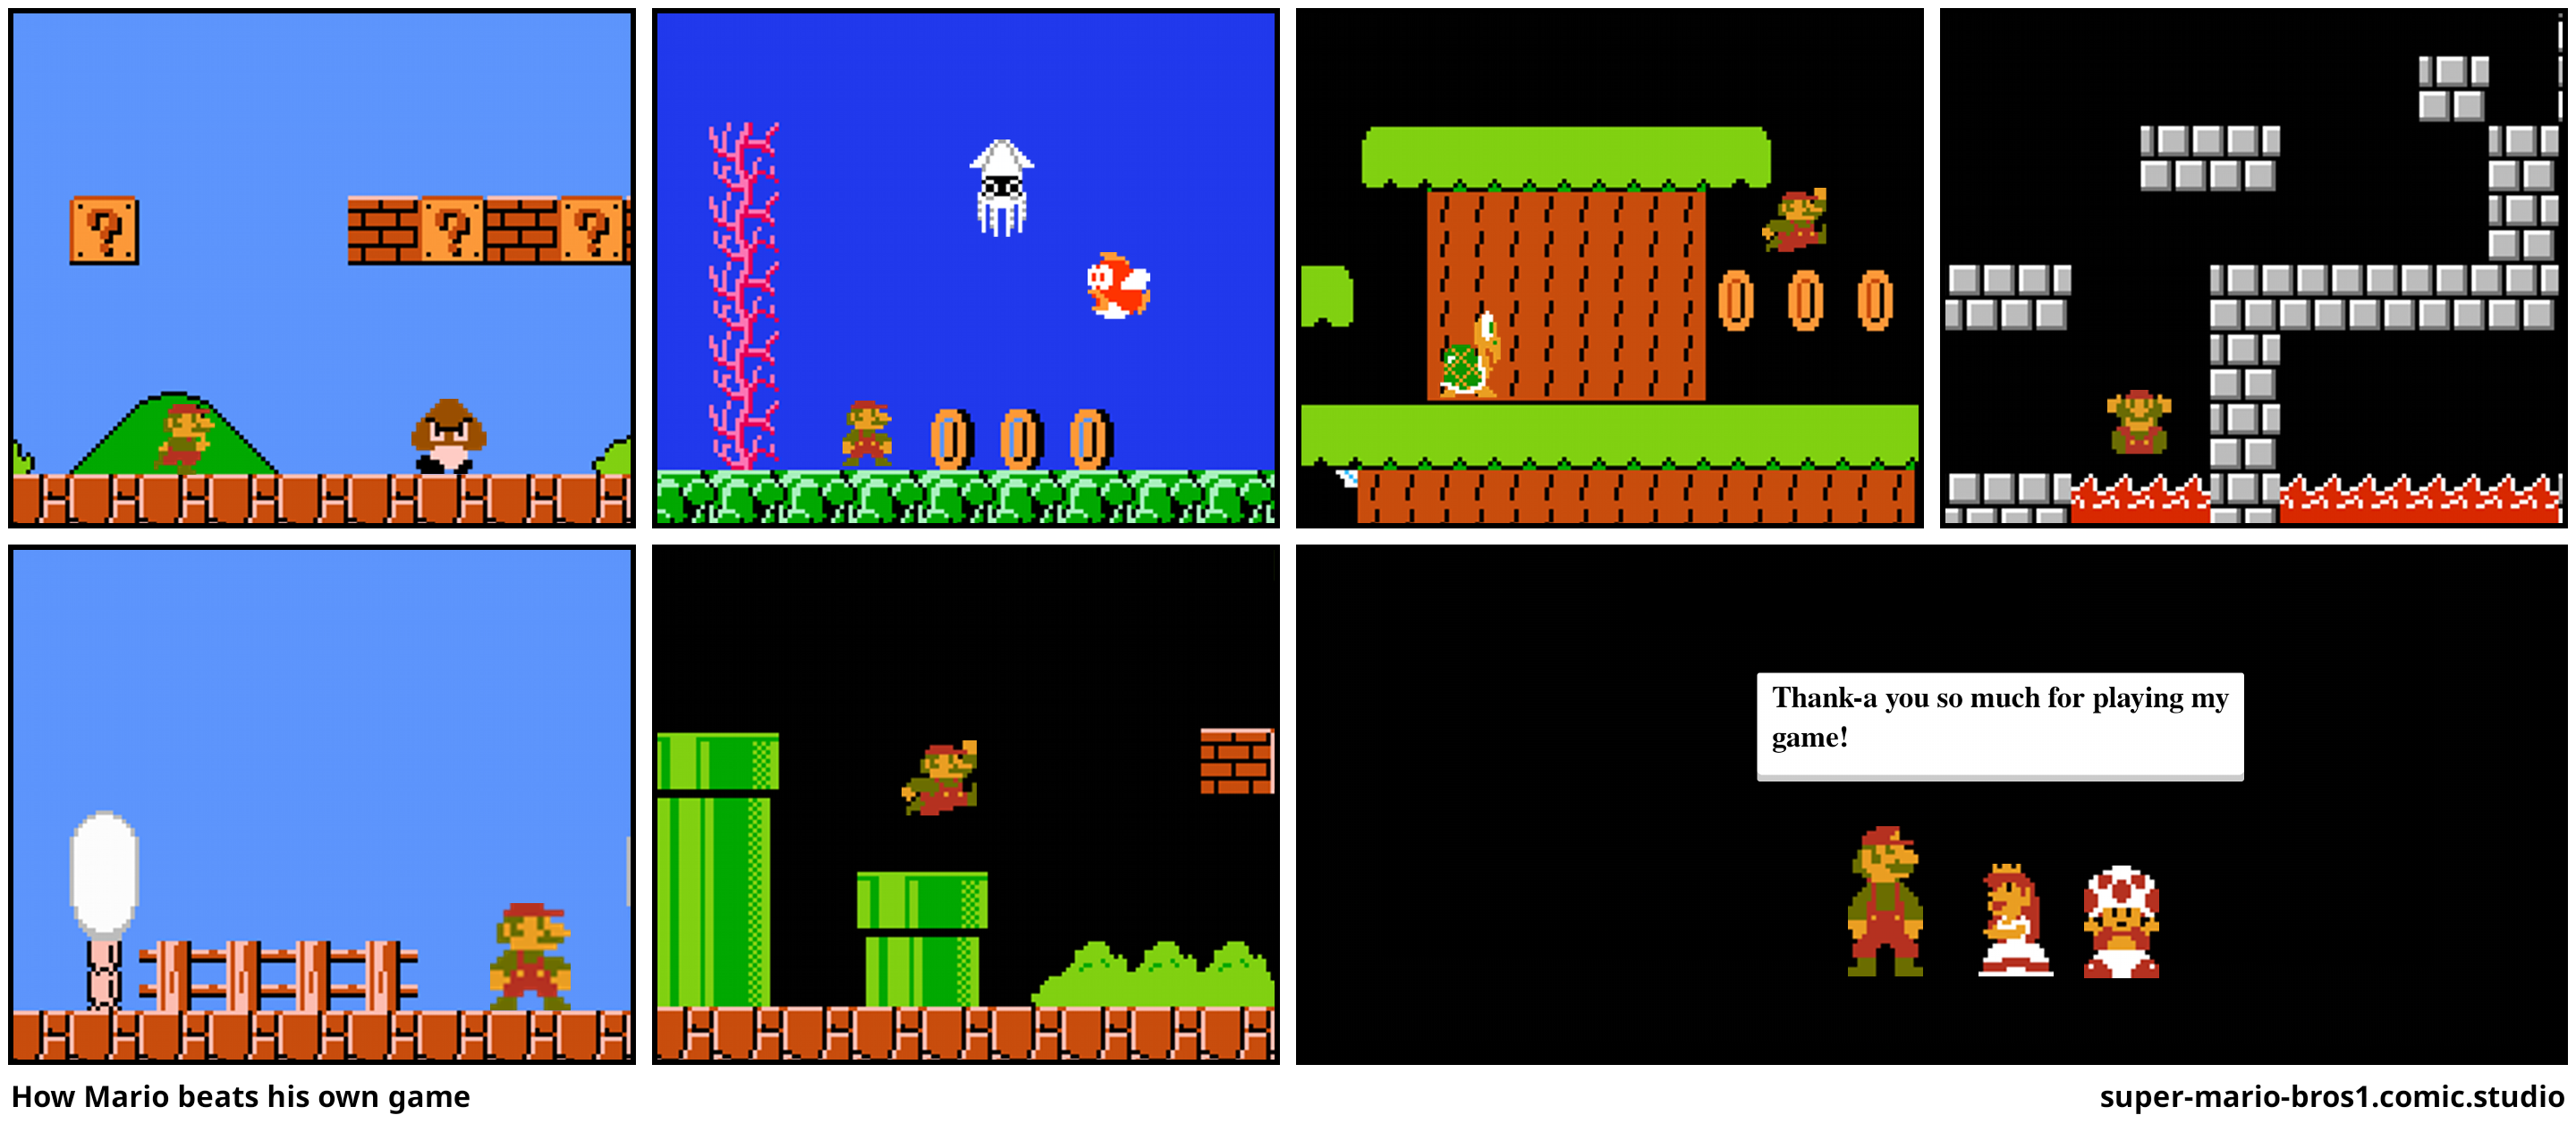 How Mario beats his own game